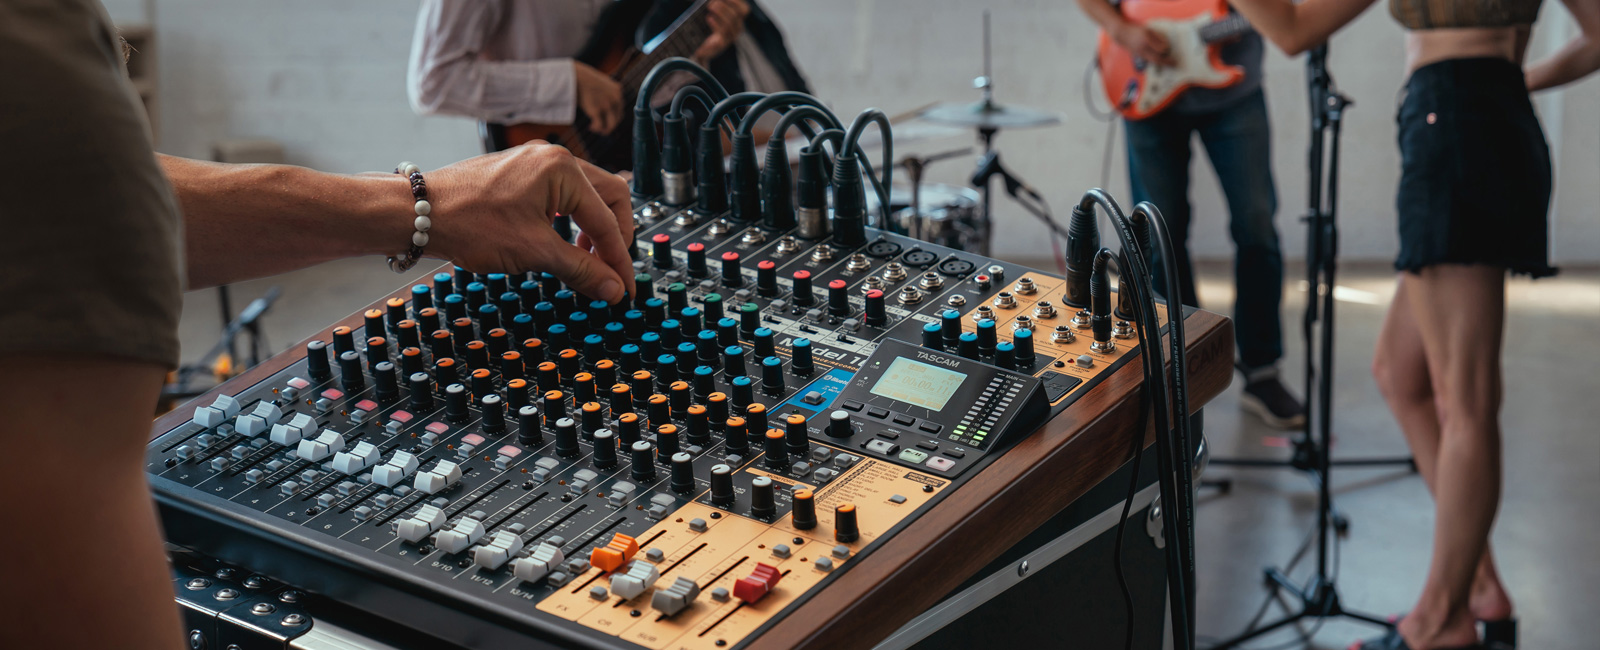 TASCAM Introduces the Model 16 All-In-One Mixing Studio